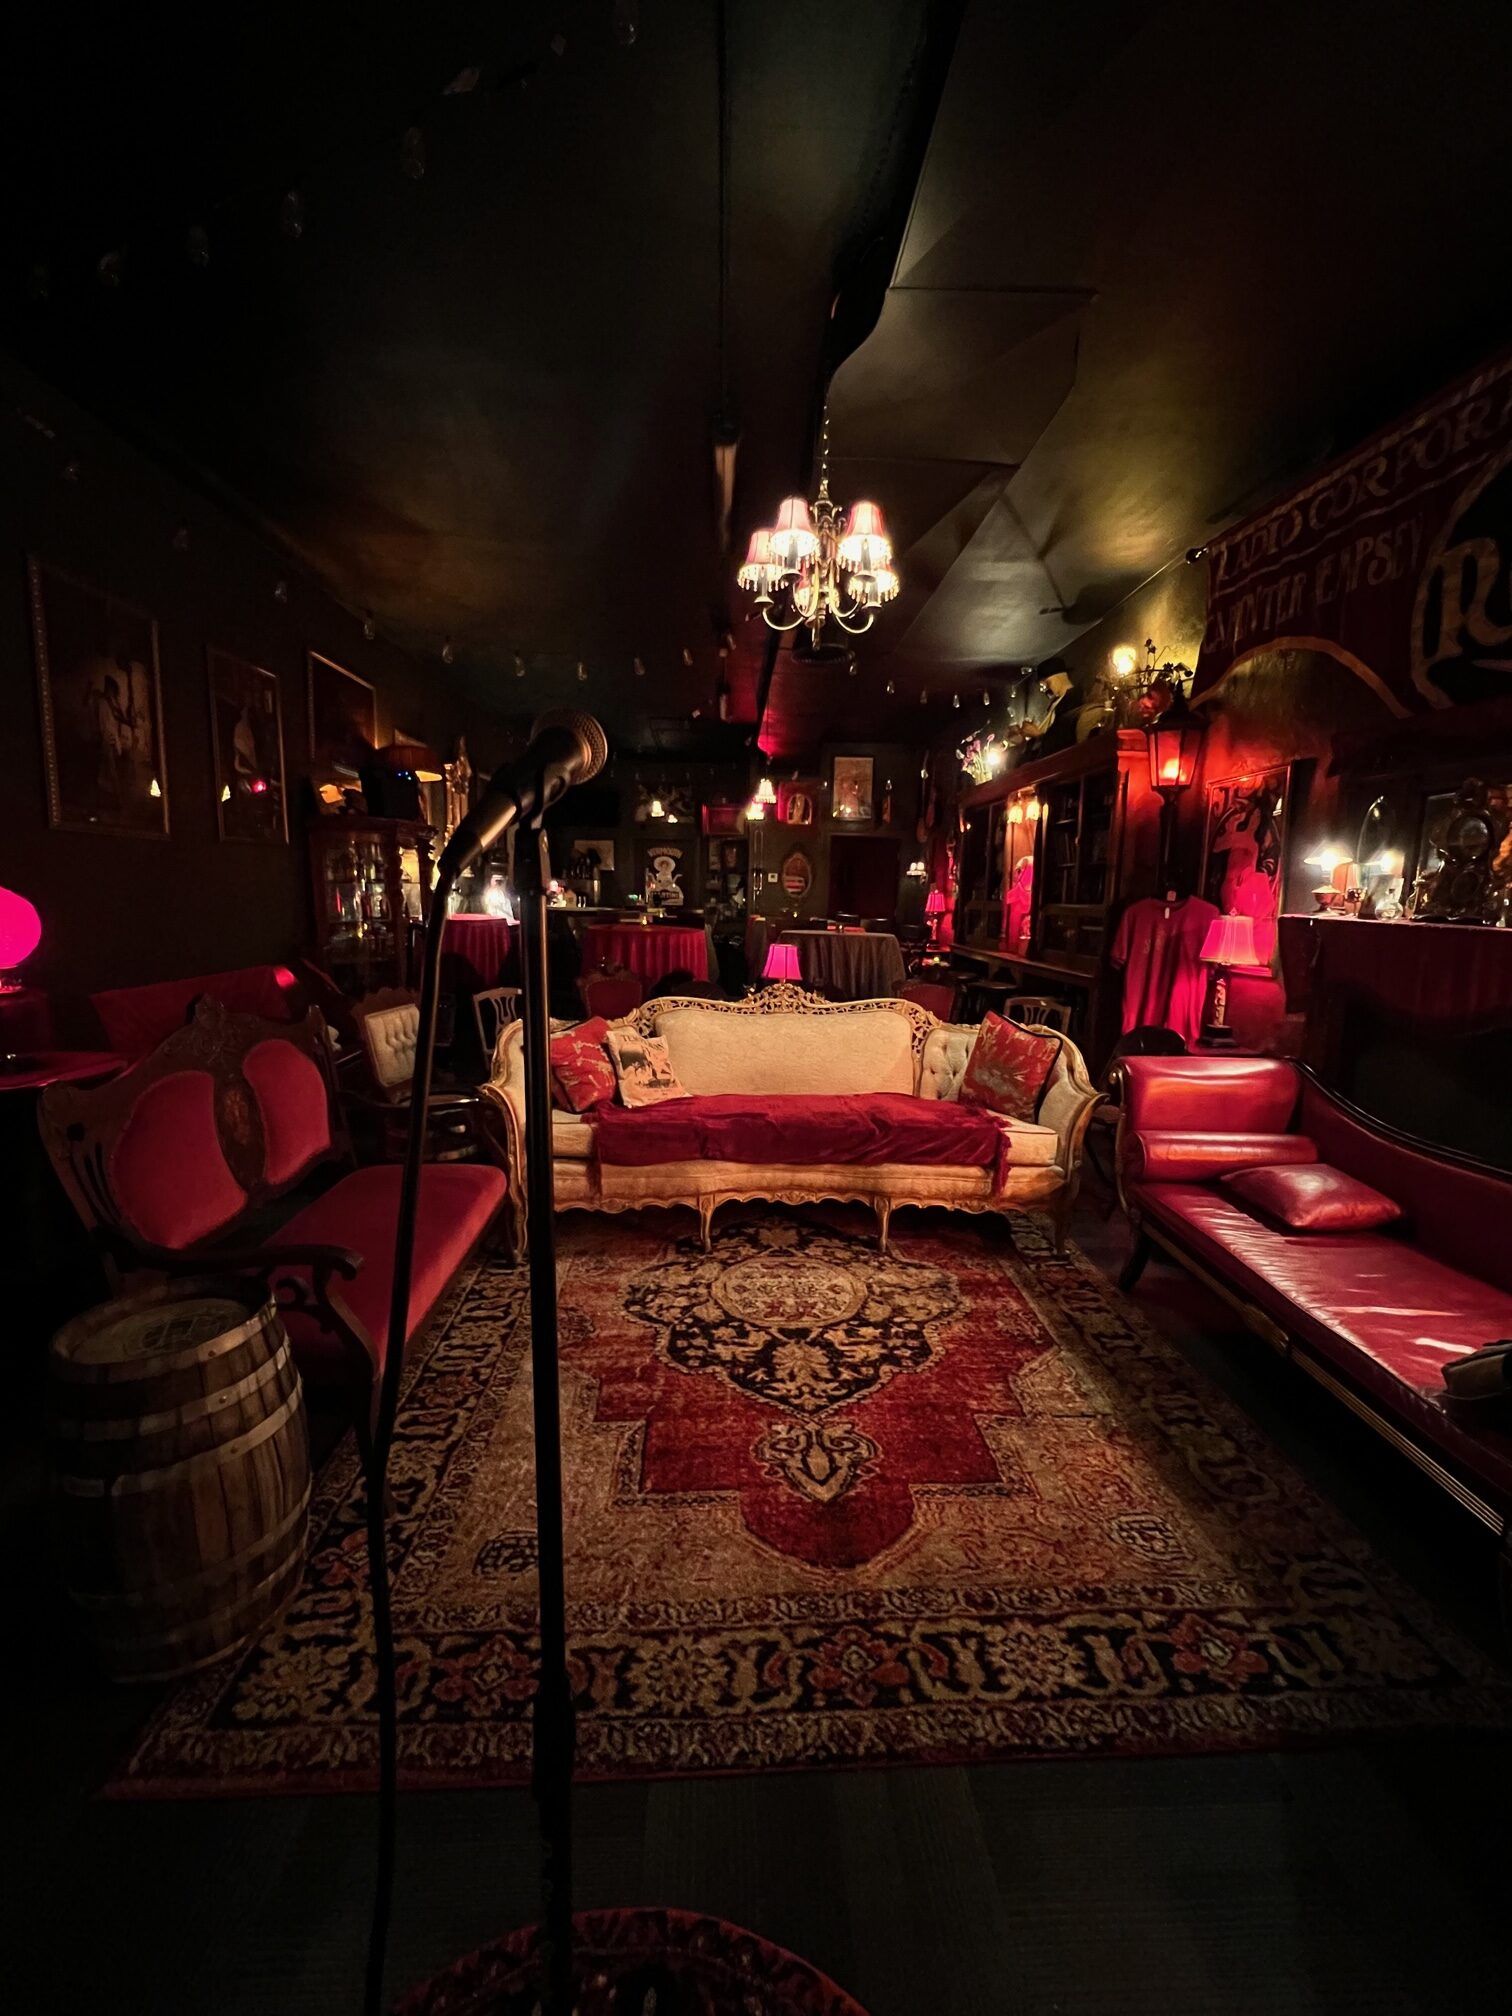 Dr-Tumbletys-tarot-Reading-Room-inspired-by-spirits-storyville-lounge-private-events-pittsburgh-distillery-burlesque-creative-cocktails-7